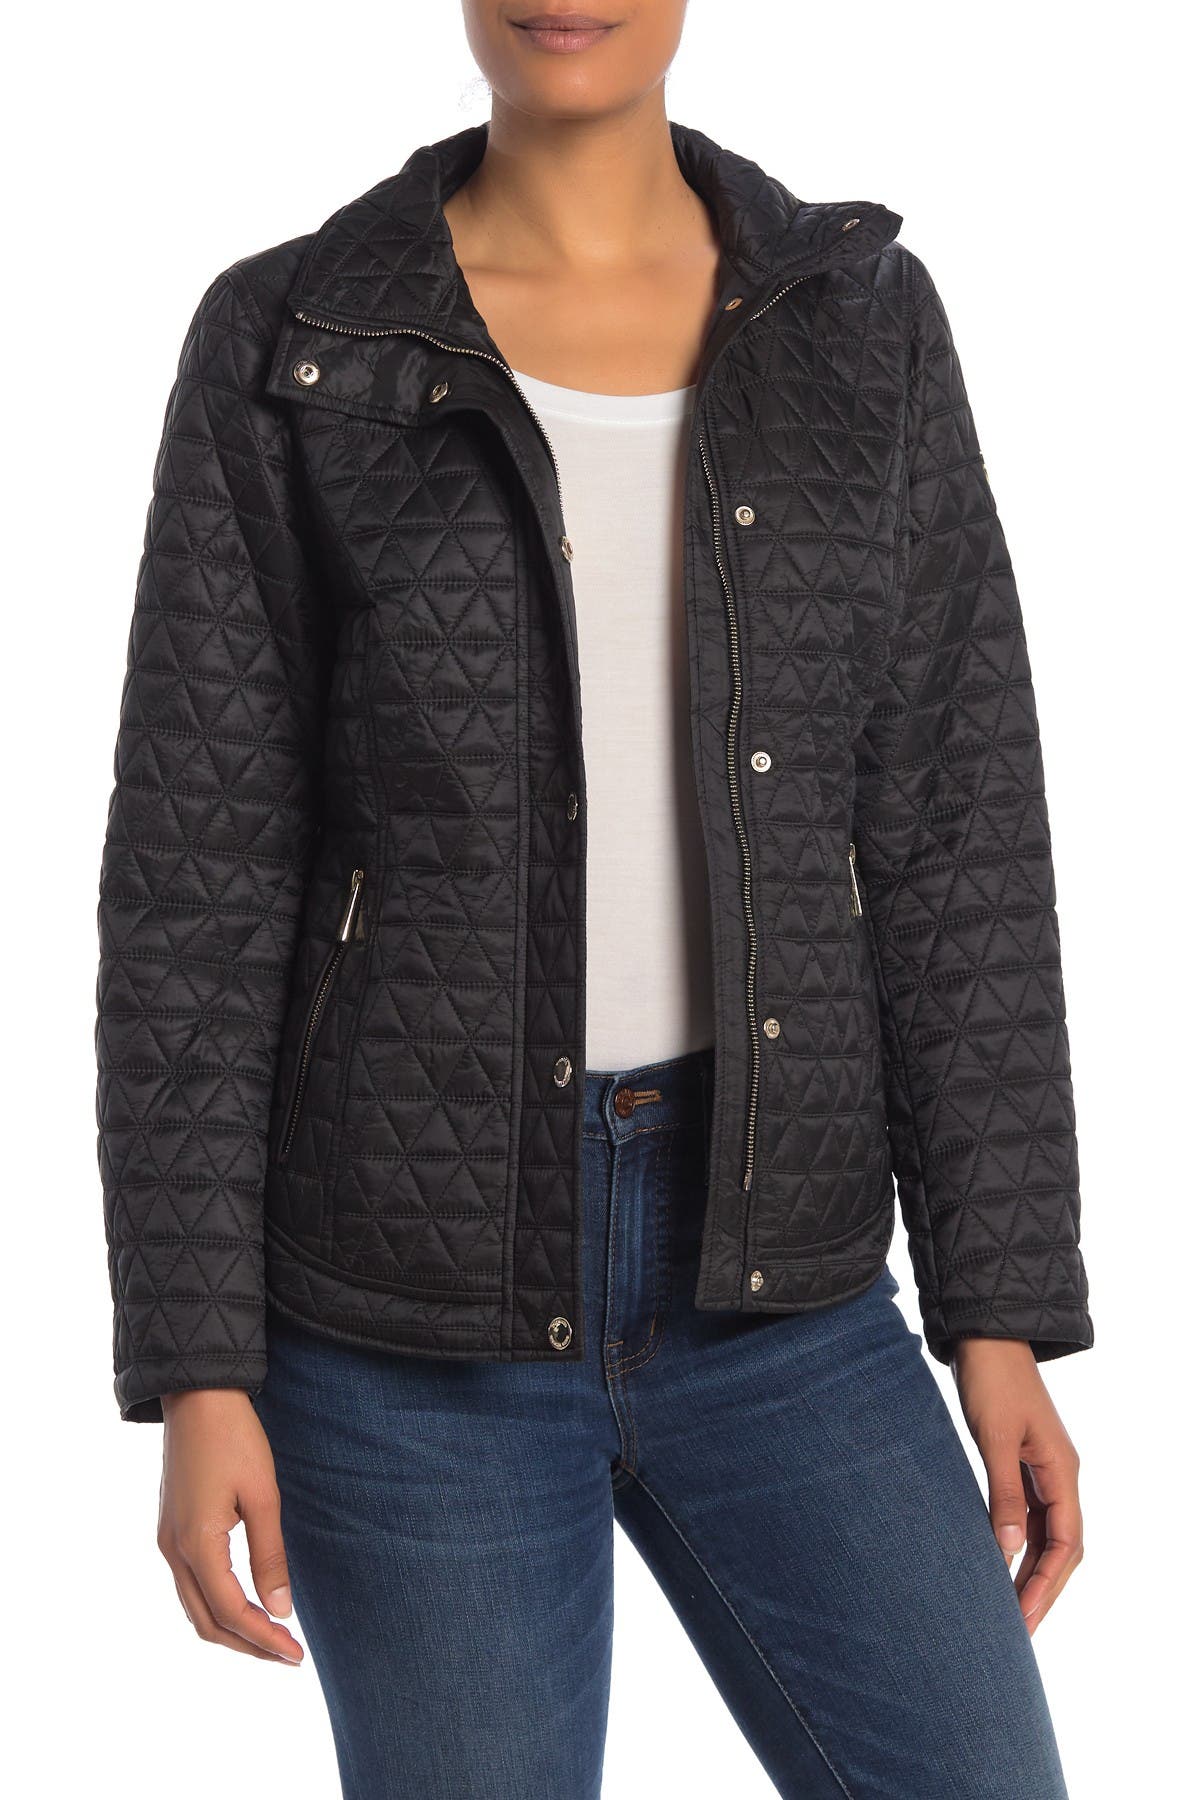 michael kors quilted jacket